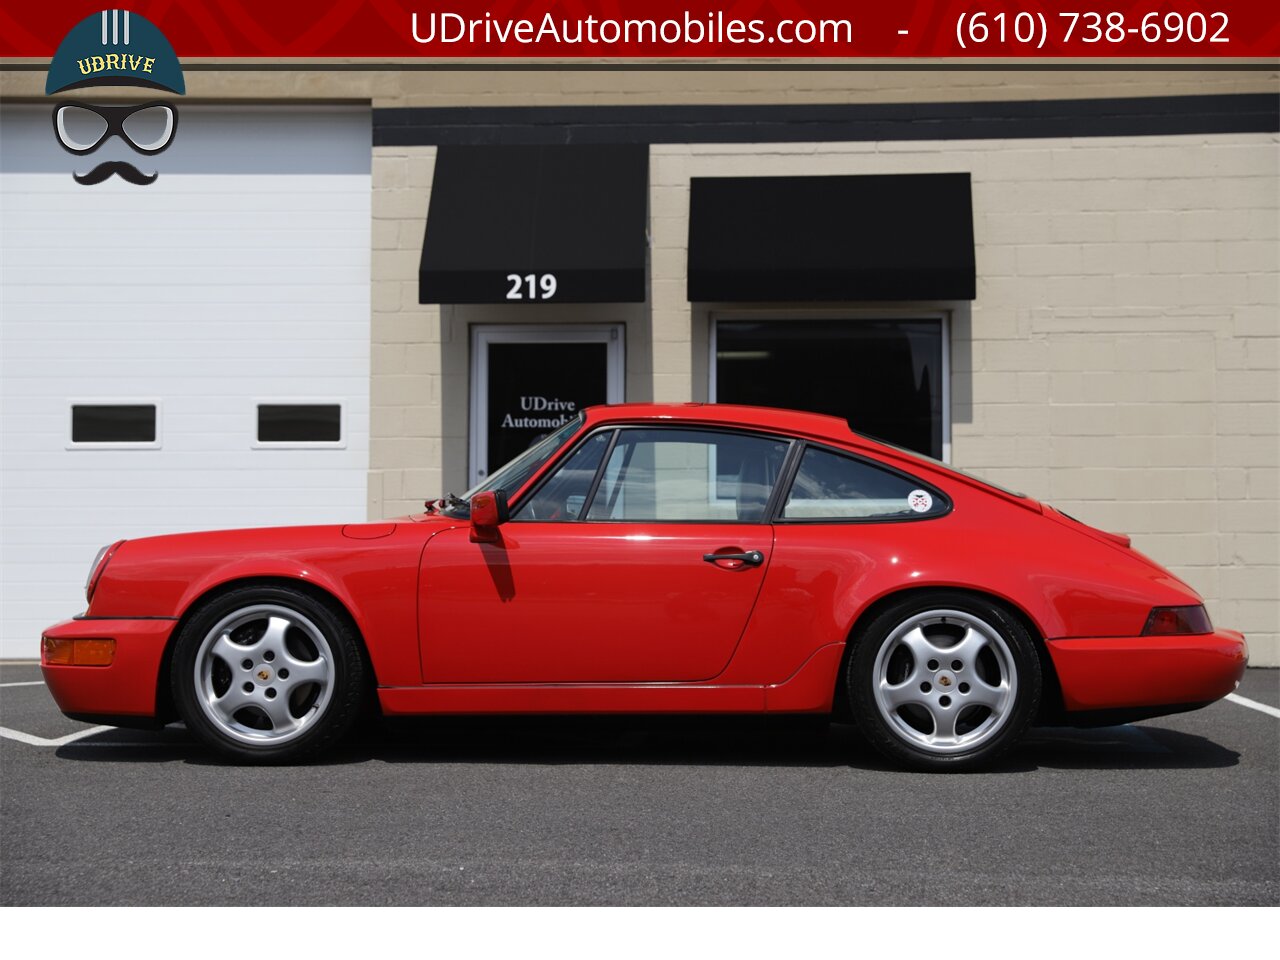 1989 Porsche 911 Carrera 4 964 C4 5 Speed Engine Rebuild  $40k in Service History Cup 1 Wheels - Photo 6 - West Chester, PA 19382